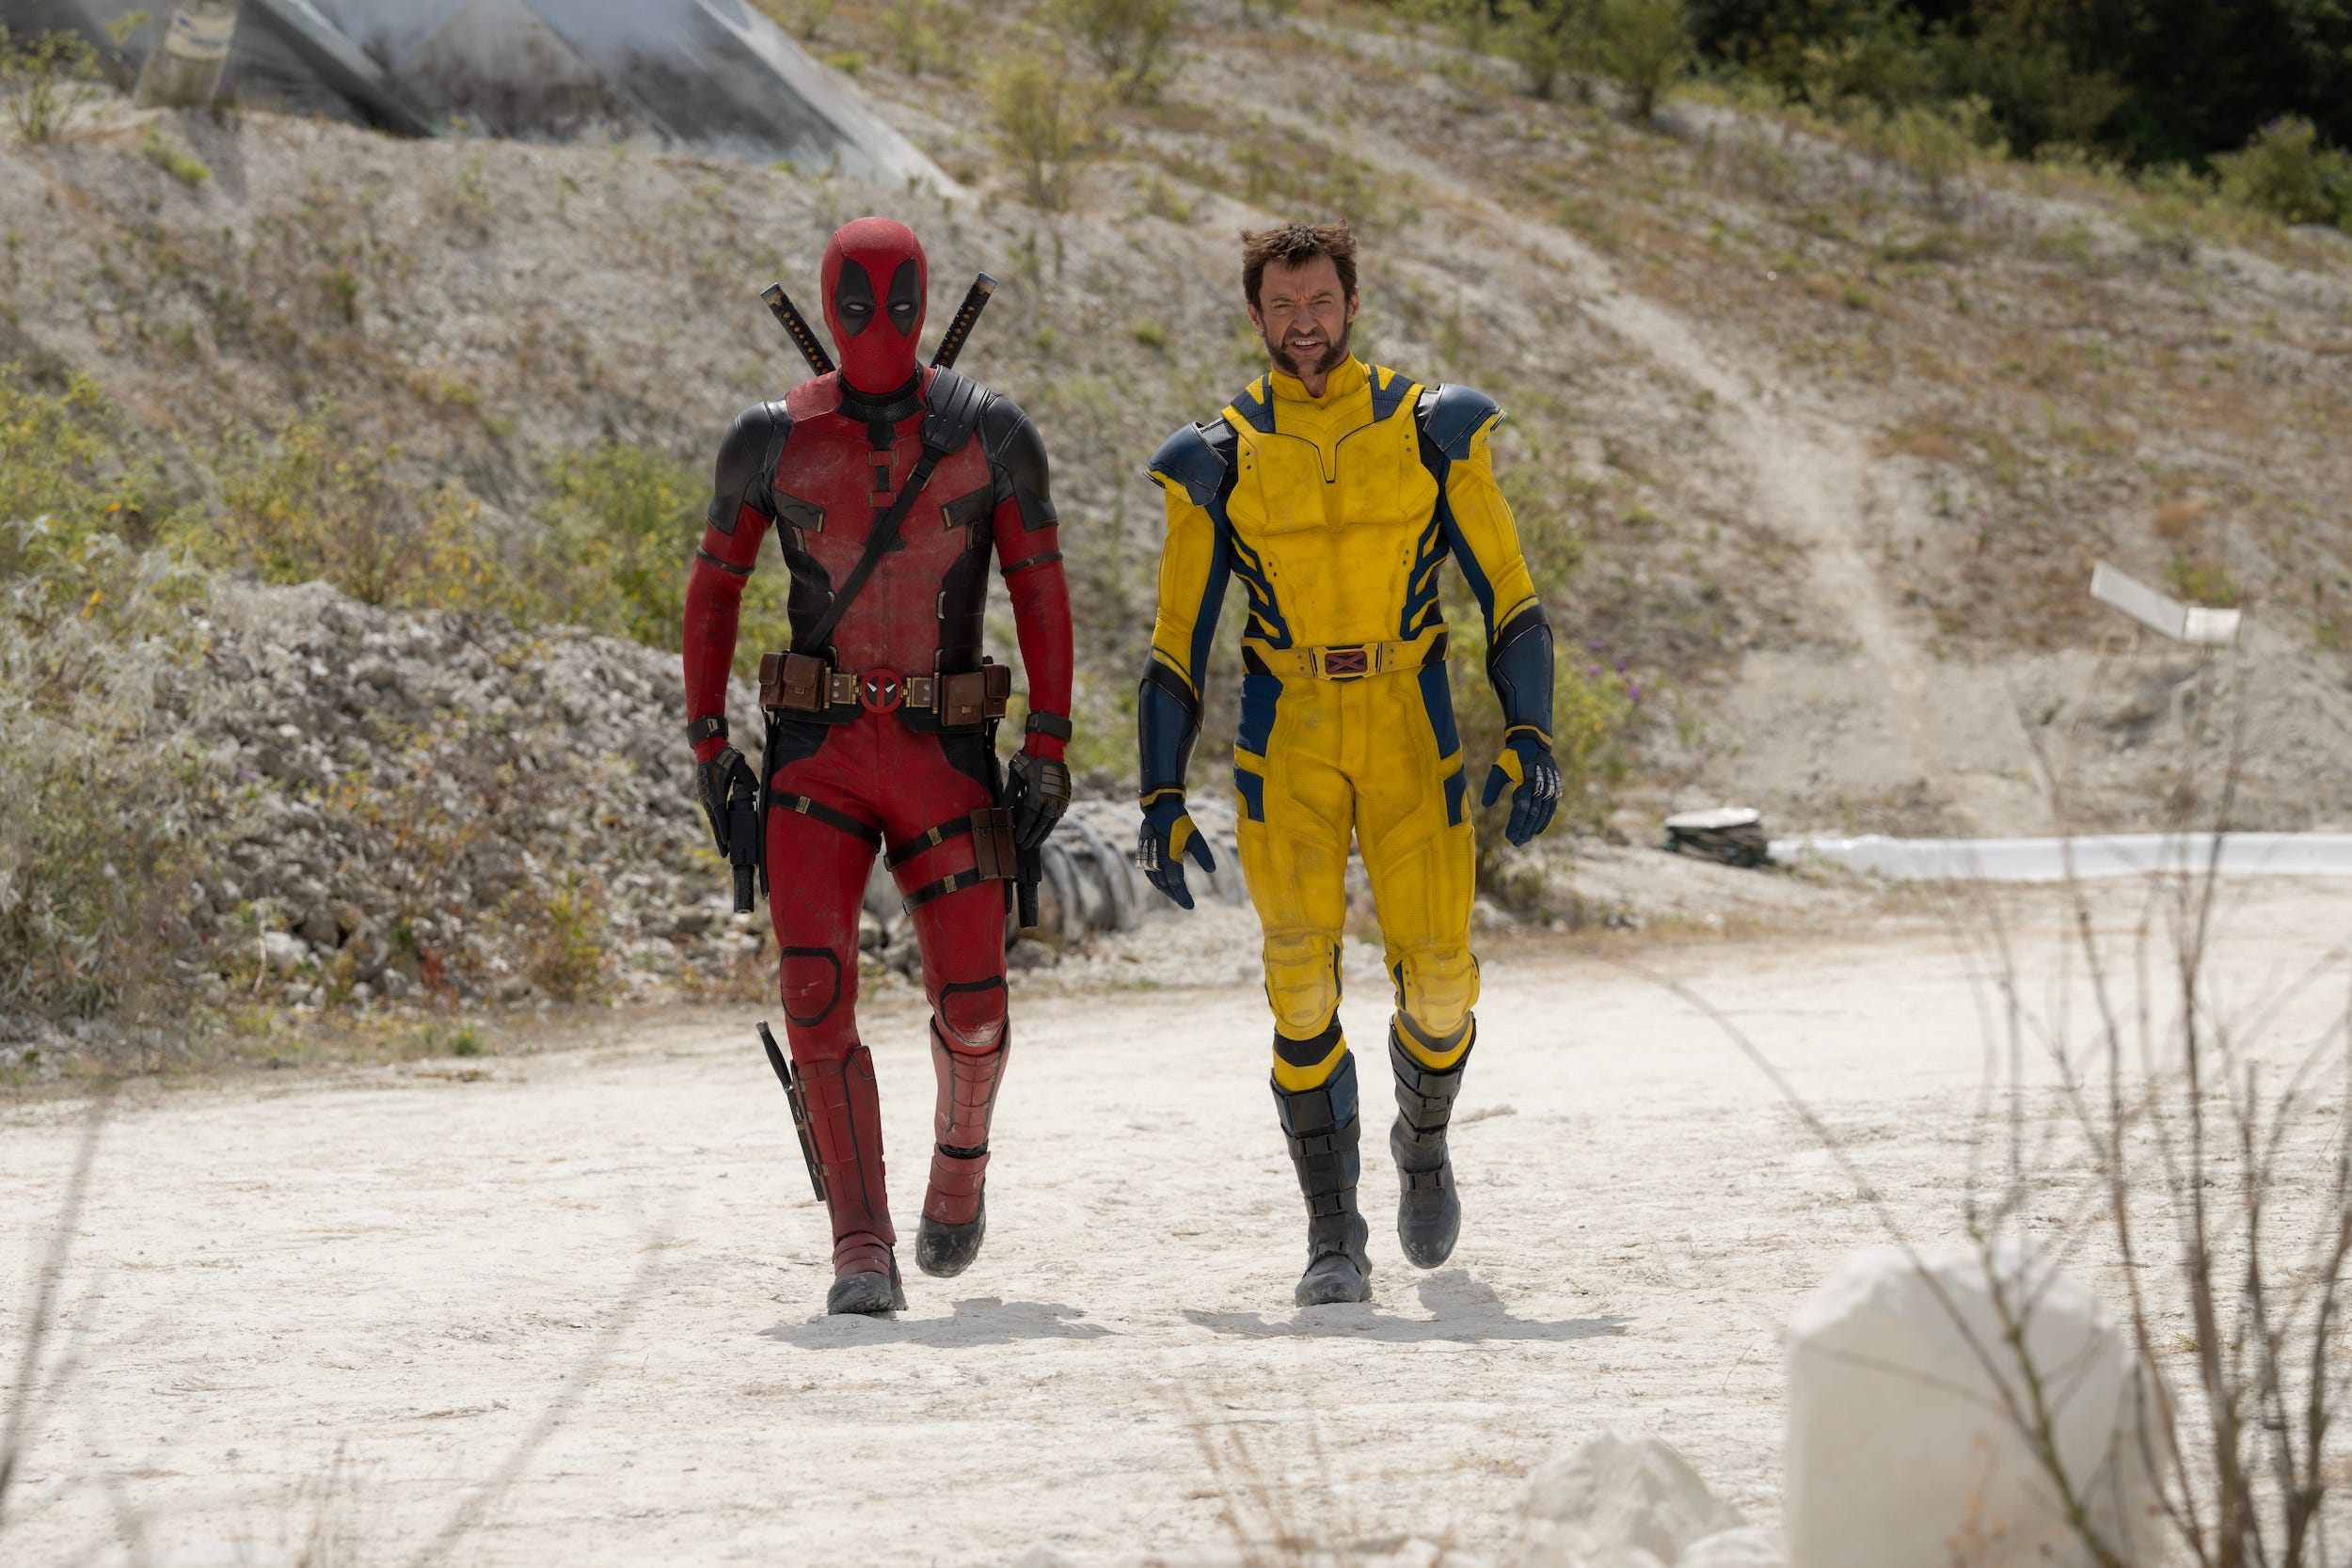 <p>In one of 2024's most anticipated movies, Hugh Jackman will join Ryan Reynolds' antihero in the next "Deadpool" sequel, reprising his role as X-Men fan-favorite Wolverine.</p><p>Reports and rumors claim fans could be in store for many familiar faces from Marvel's past in the new Shawn Levy-directed film, <a href="https://www.hollywoodreporter.com/movies/movie-news/deadpool-3-jennifer-garner-returning-as-elektra-1235530539/">including Jennifer Garner's Elektra</a>.</p><p>This is the sole Marvel movie Disney will release in 2024.</p>